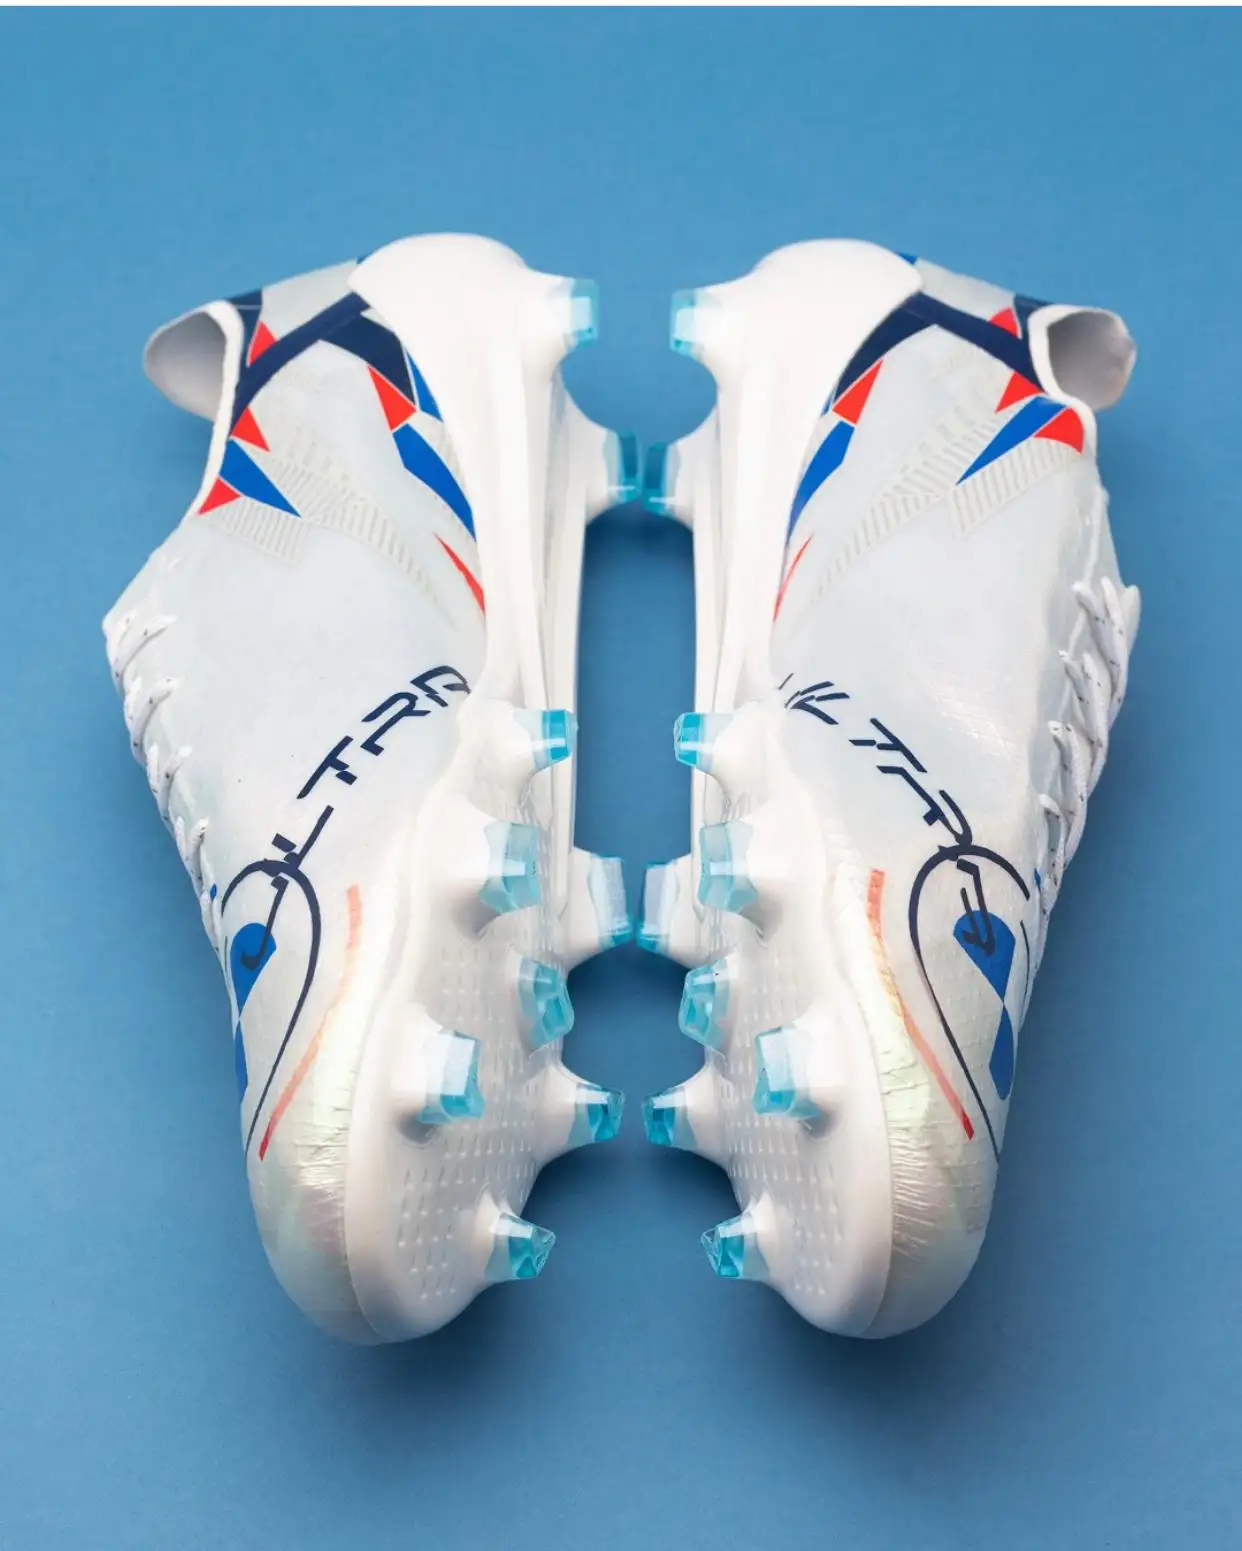 Football Soccer Shoes High Standard Used Brand Football Shoes Men Soccer Boots